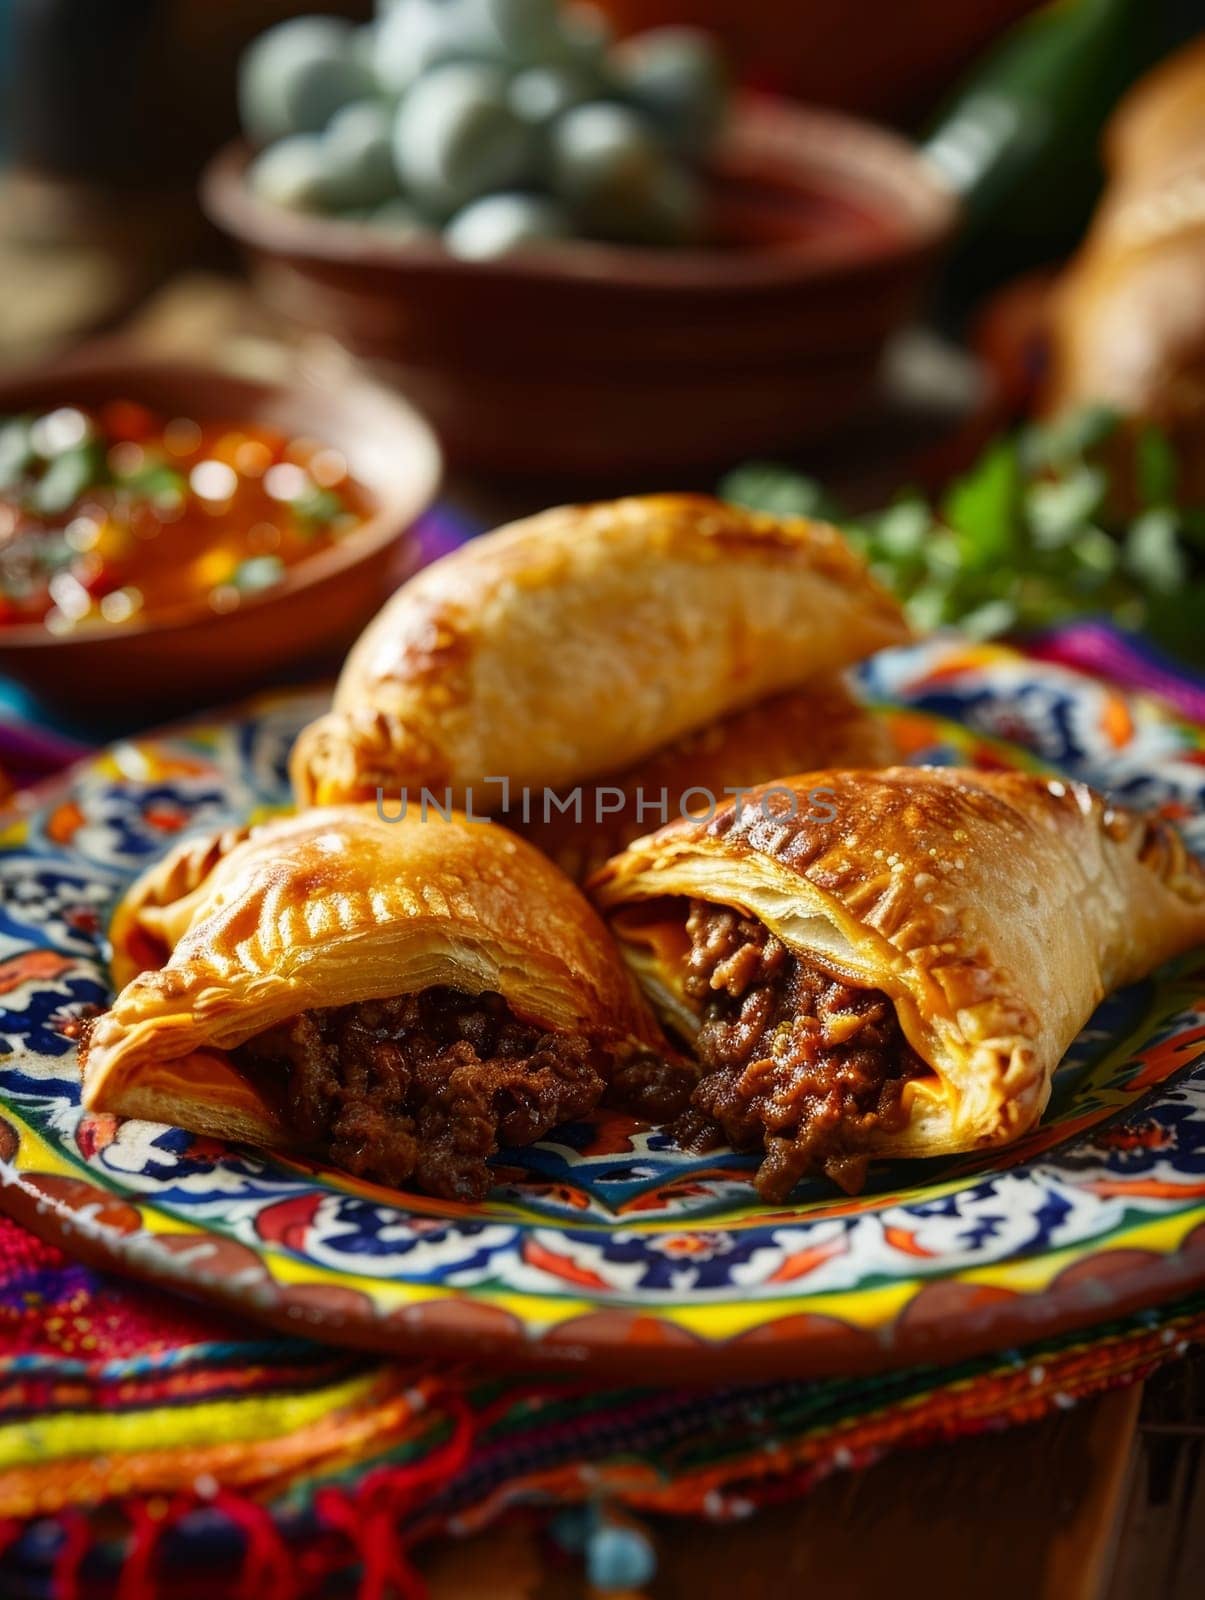 Authentic Bolivian saltenas, baked pastries filled with savory meat and a spicy sauce, beautifully presented on a colorful ceramic plate - mouthwatering representation of the rich culinary traditions